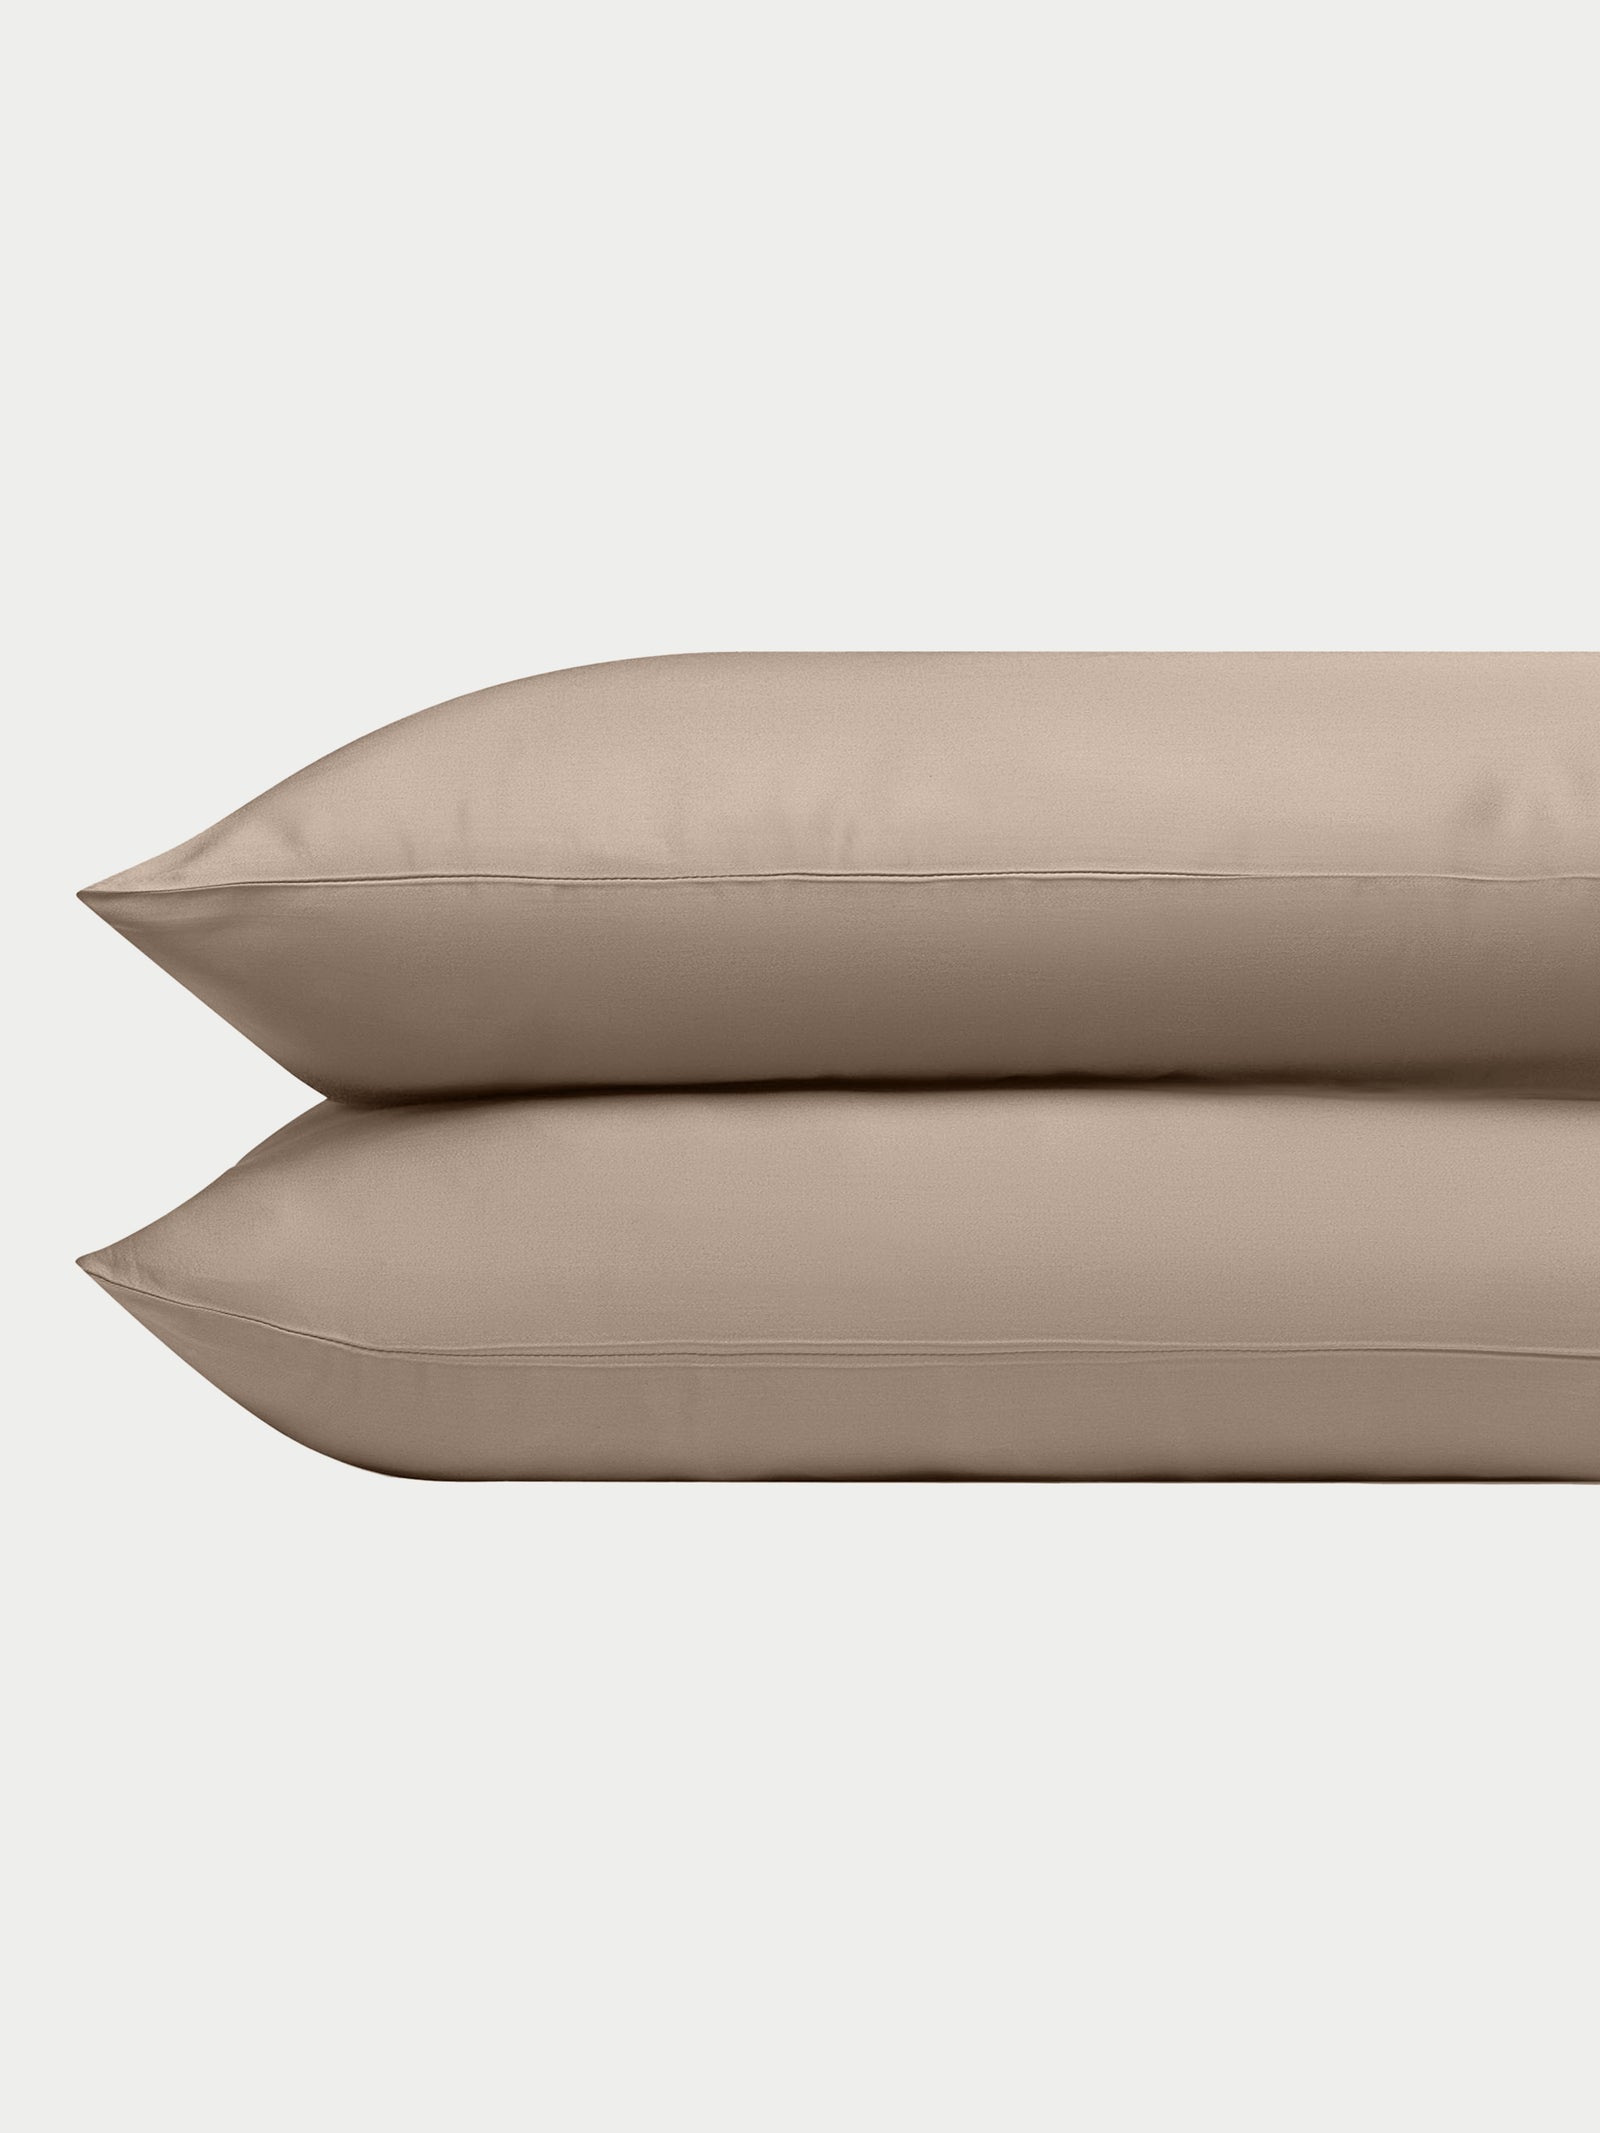 Two walnut pillowcases with a plain background standard/king/body